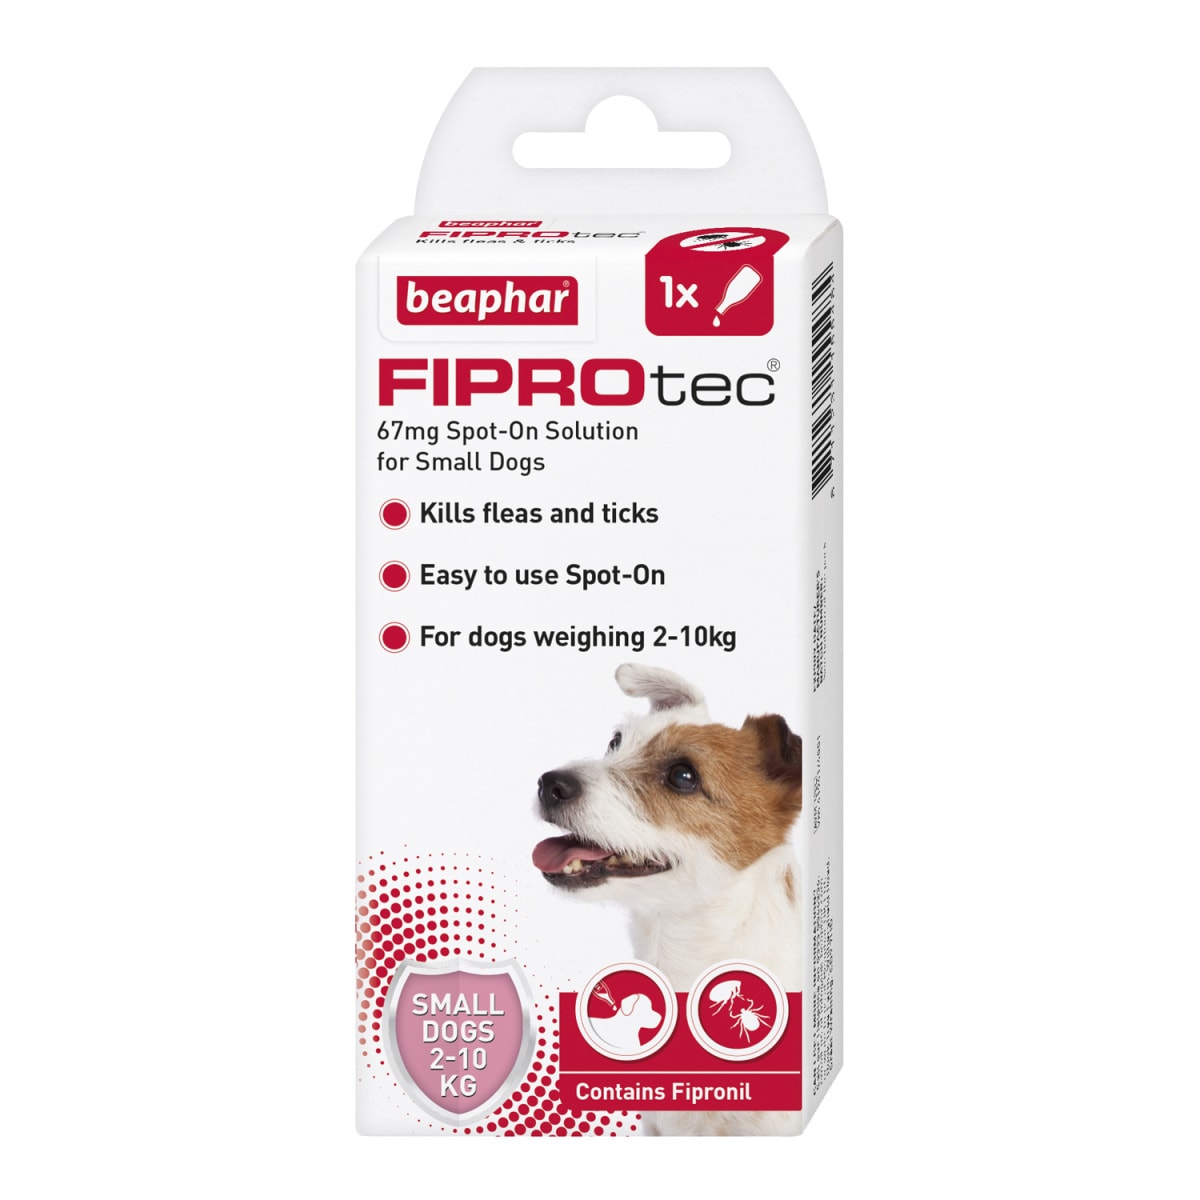 Beaphar - FIPROtec Spot On Small Dog Product Image